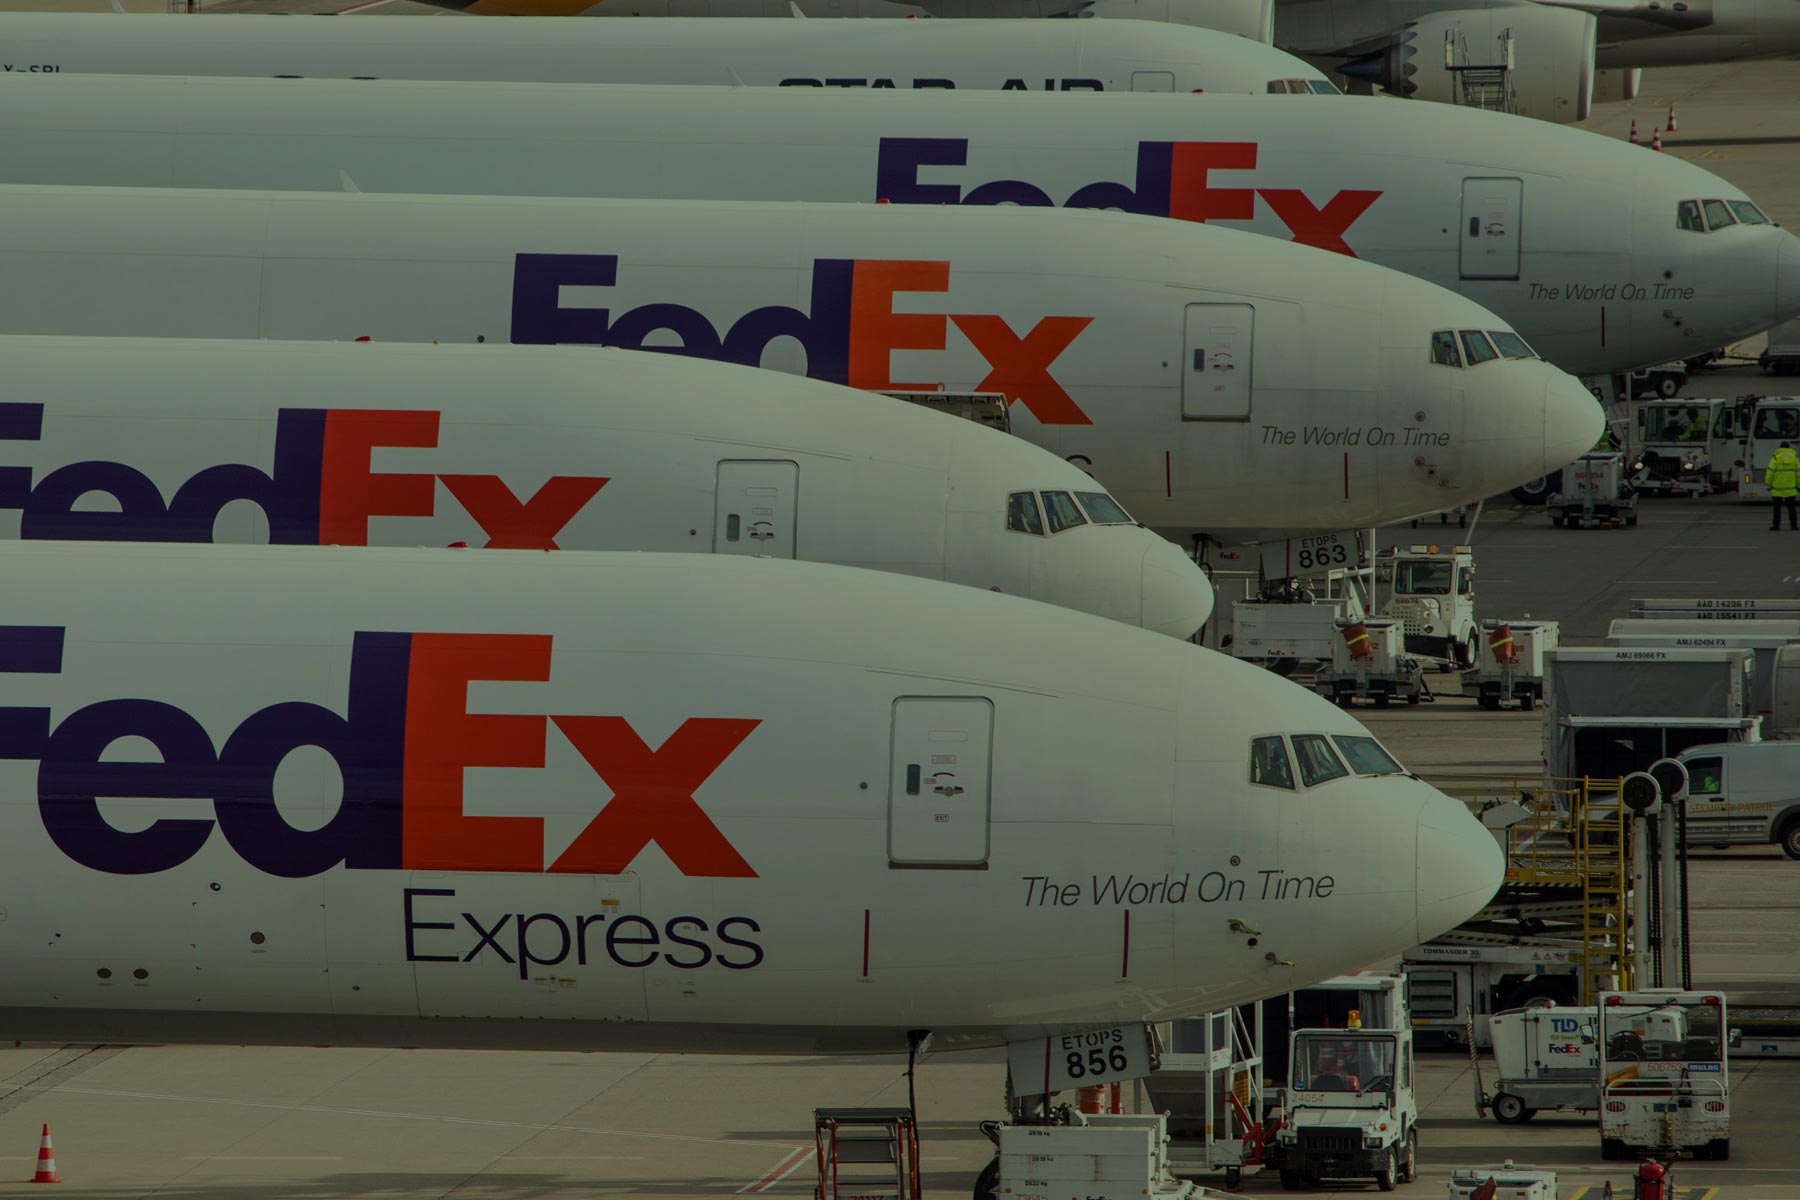 FedEx planes lined up on airport runway